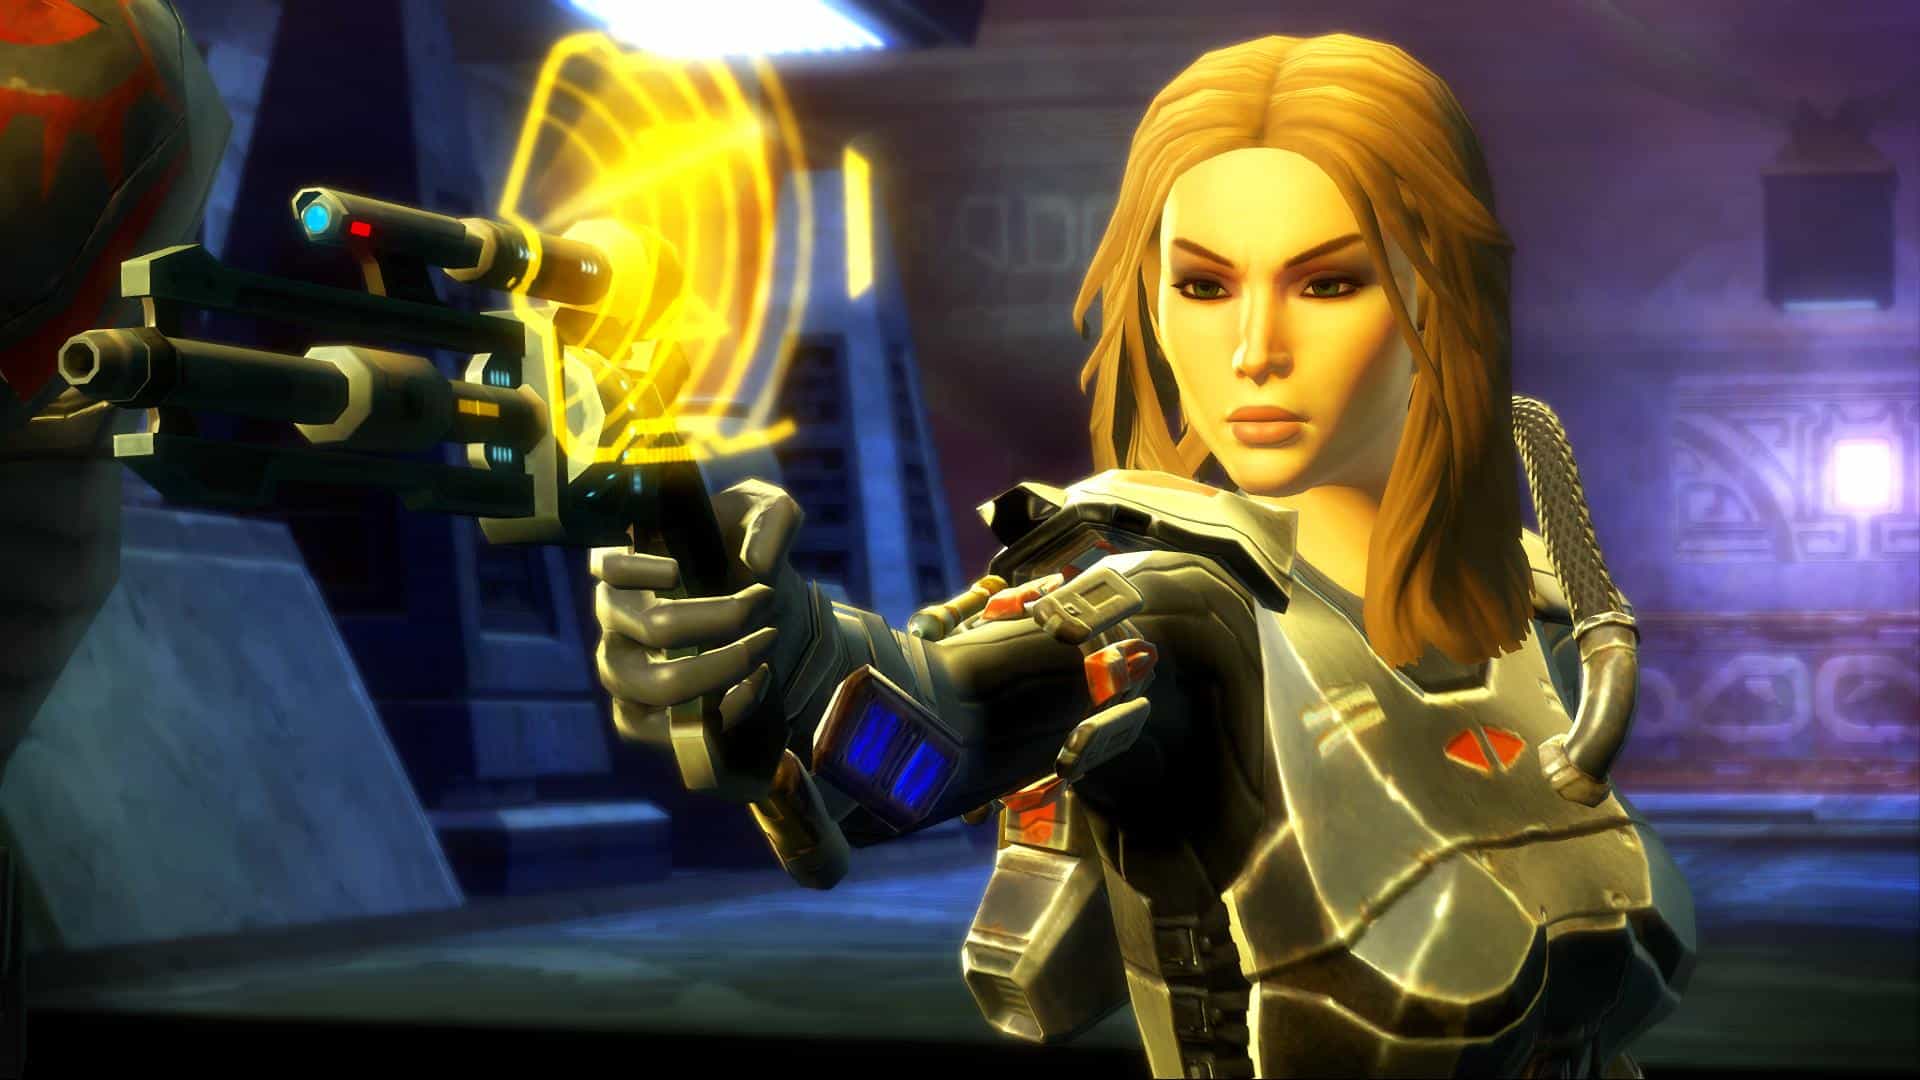 SWTOR: Technical features coming in 5.10.2.